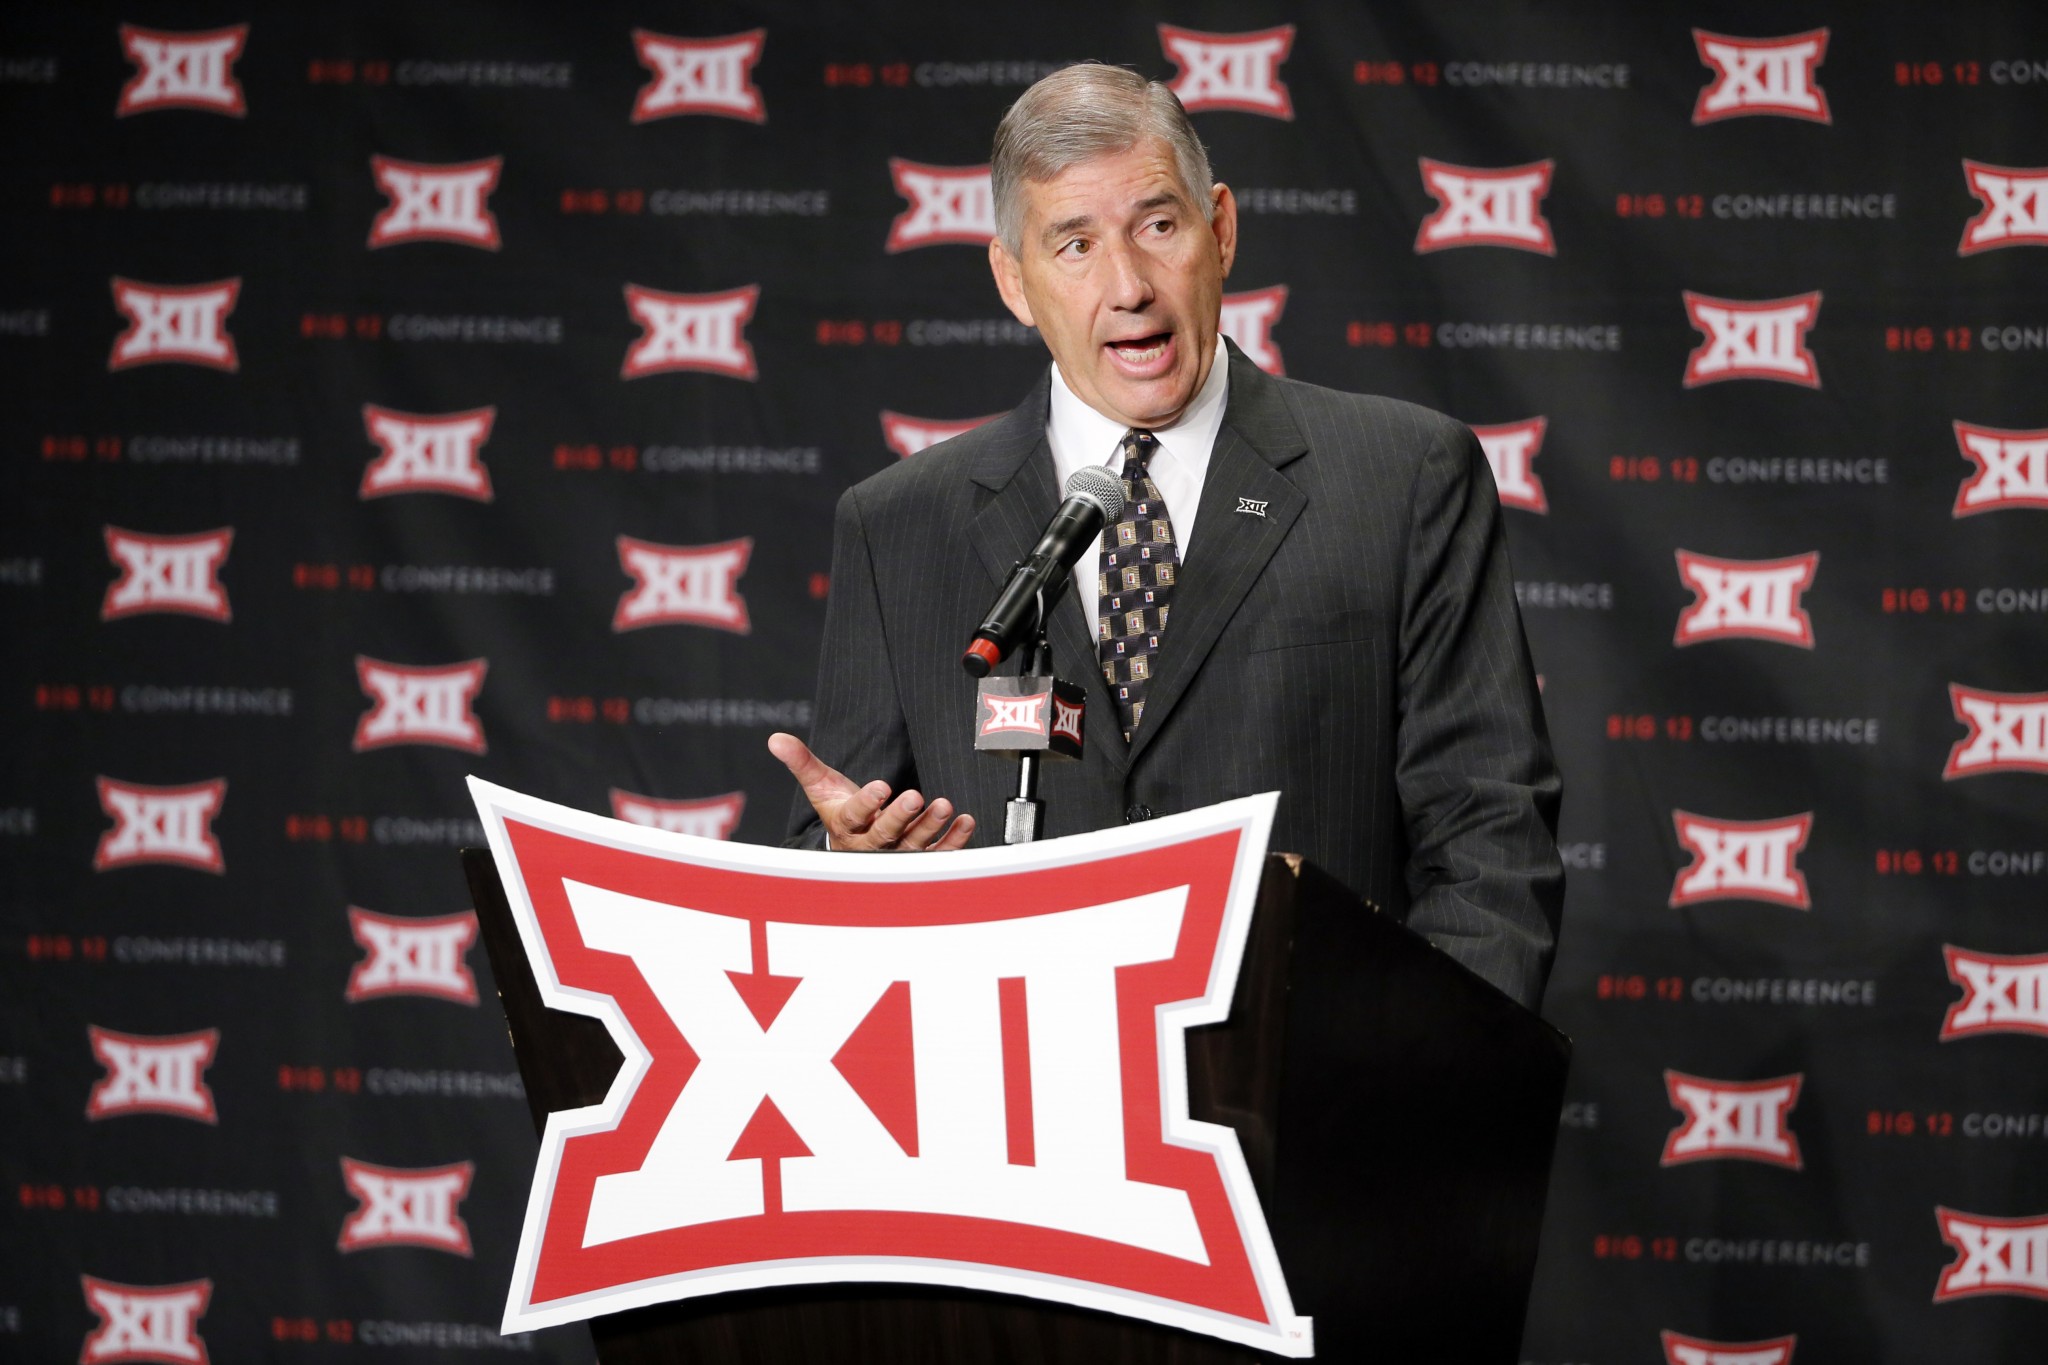 Big 12 commissioner Bob Bowlsby addresses attendees during Big 12 media day, Monday, July 18, 2016, in Dallas. With expansion still an unsettled issue for the Big 12 Conference, Commissioner Bowlsby gave his annual state of the league address to open football media days. And a day later he meets with the league's board of directors. (AP Photo/Tony Gutierrez)